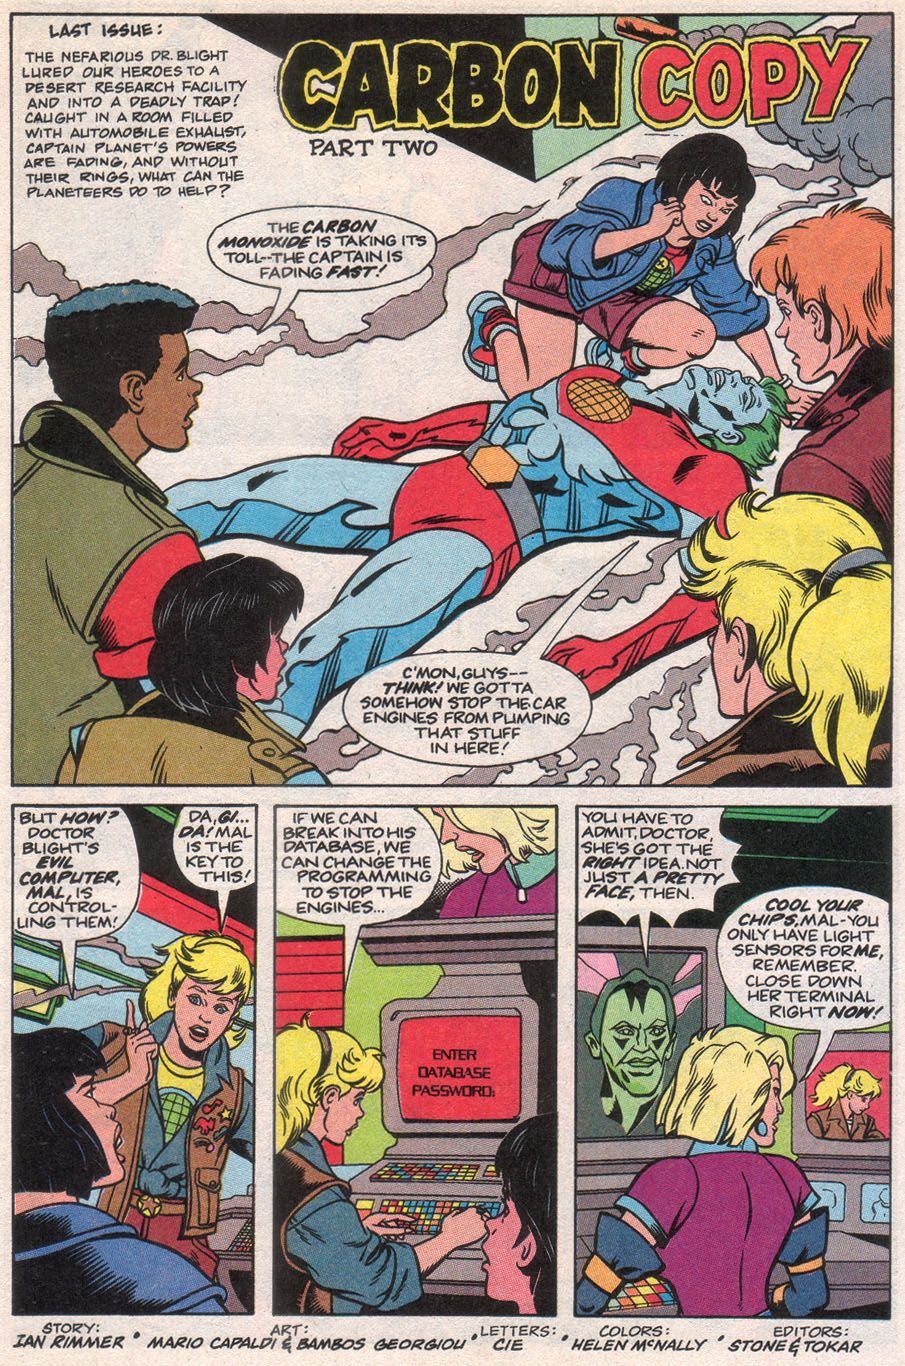 Captain Planet and the Planeteers 9 Page 16